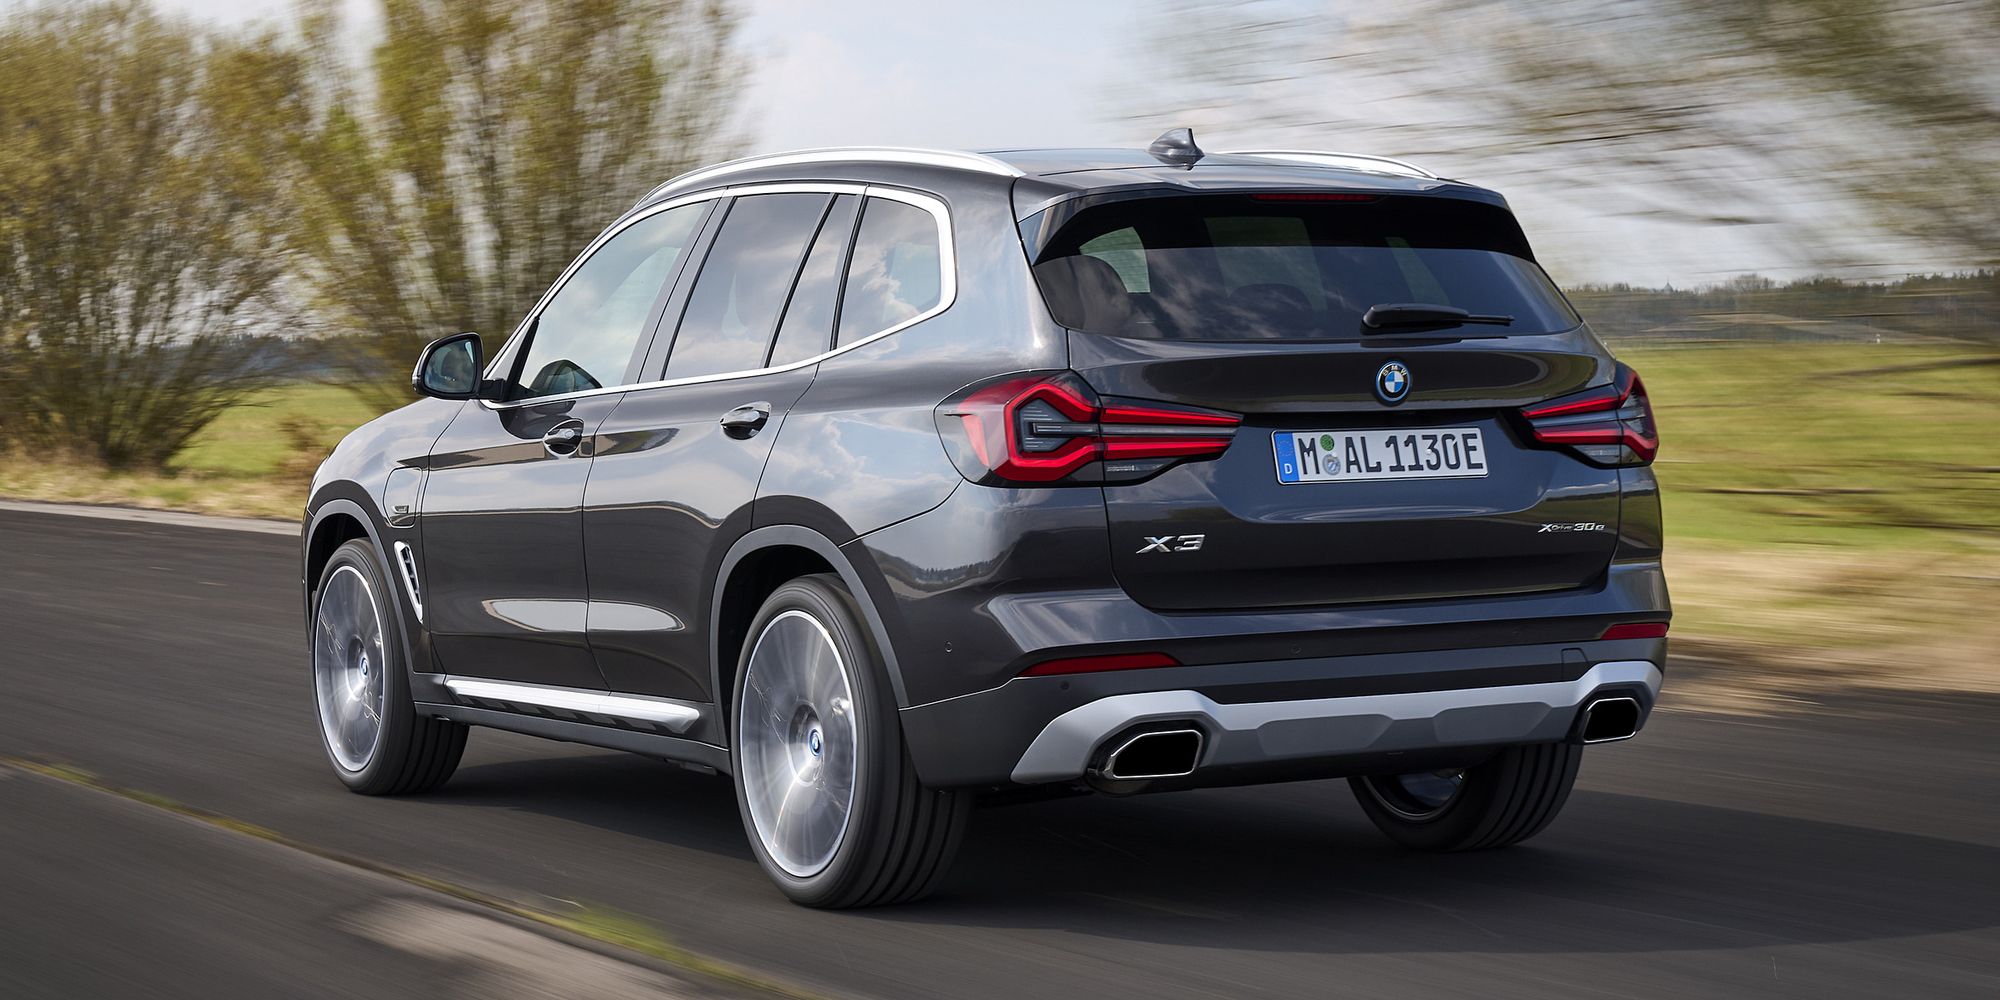 The rear of the X3 on the move